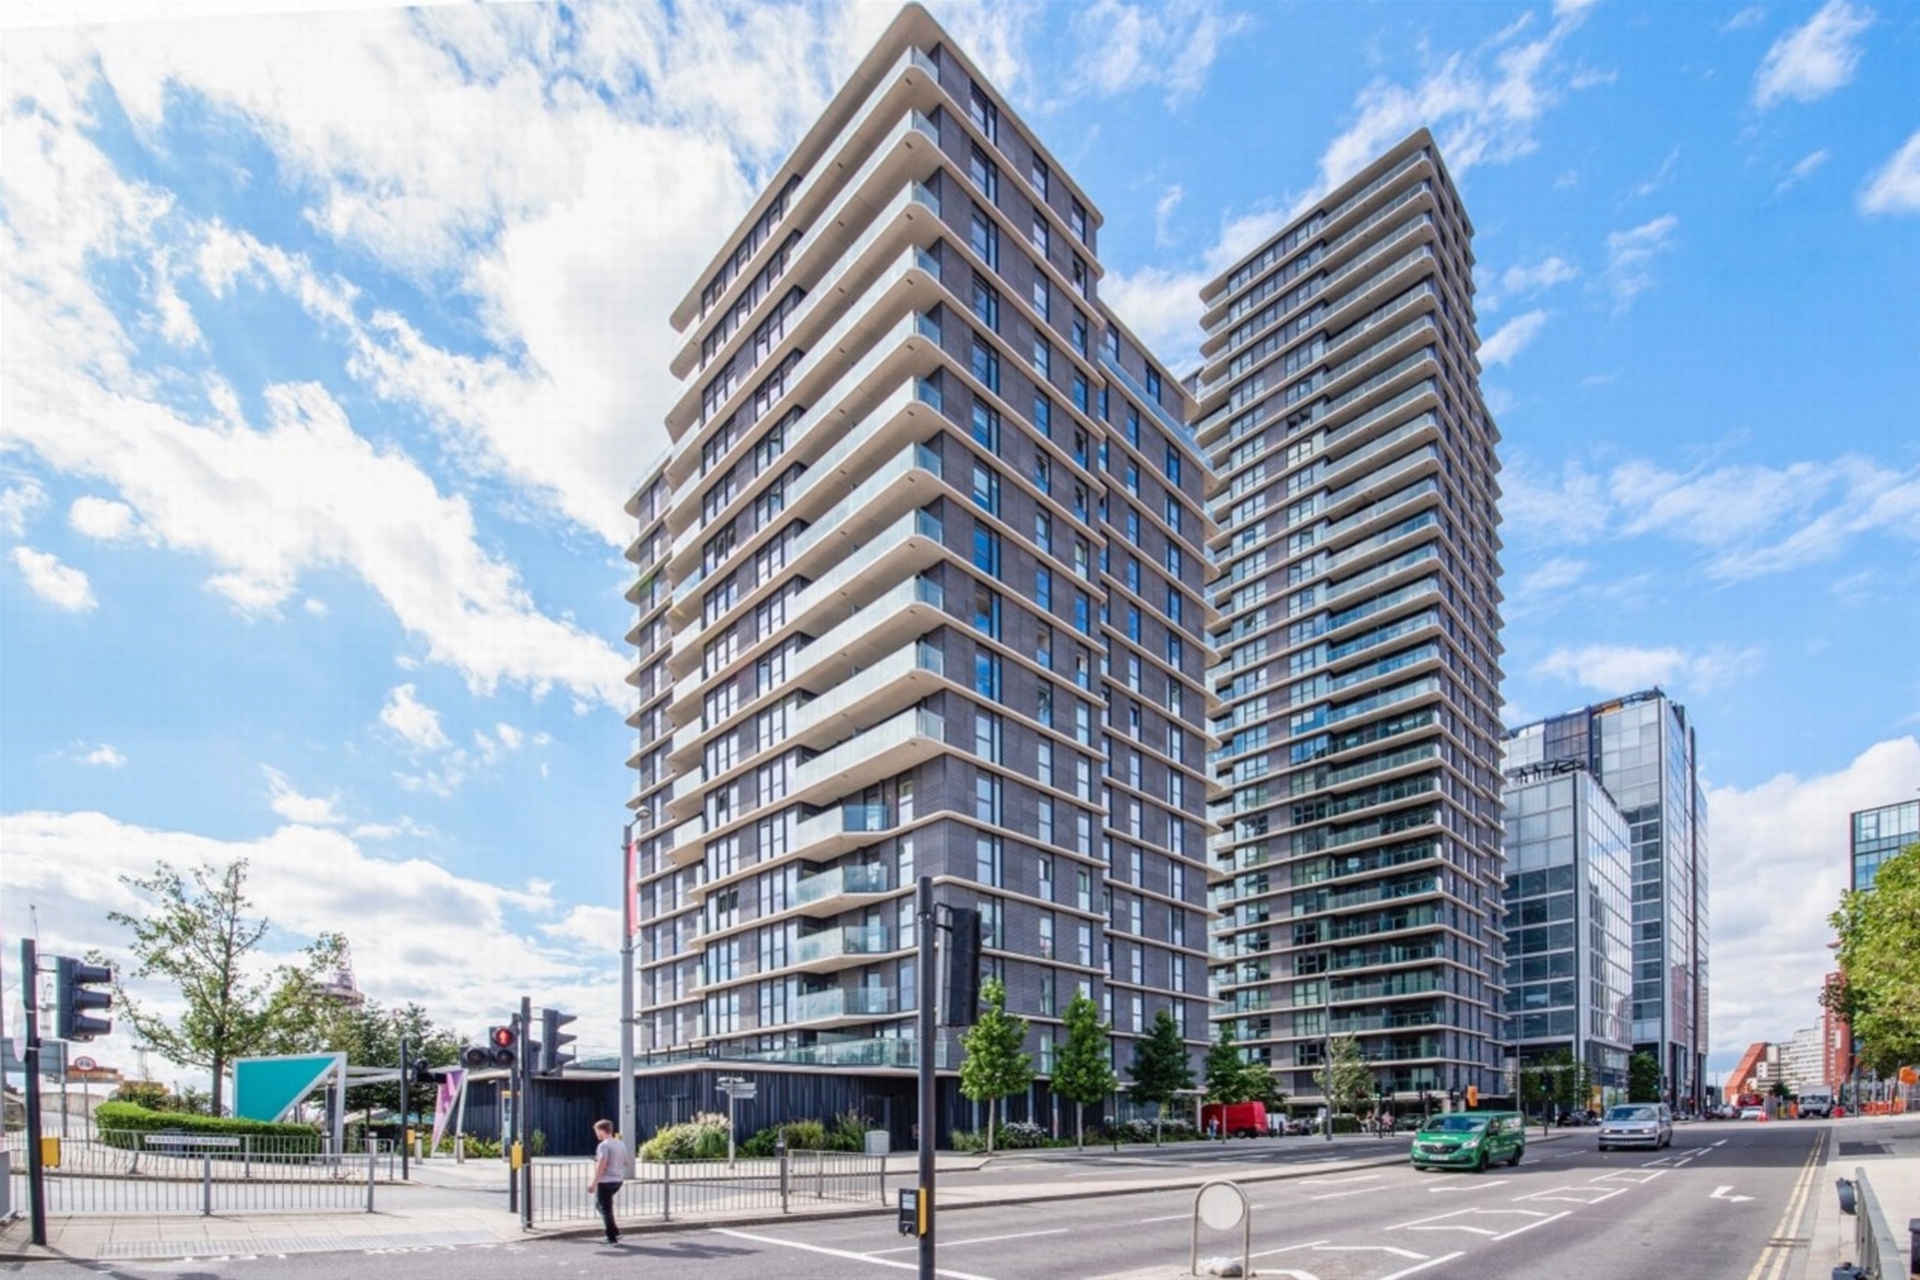 2 Bedroom Apartment to rent in Stratford, London, E20